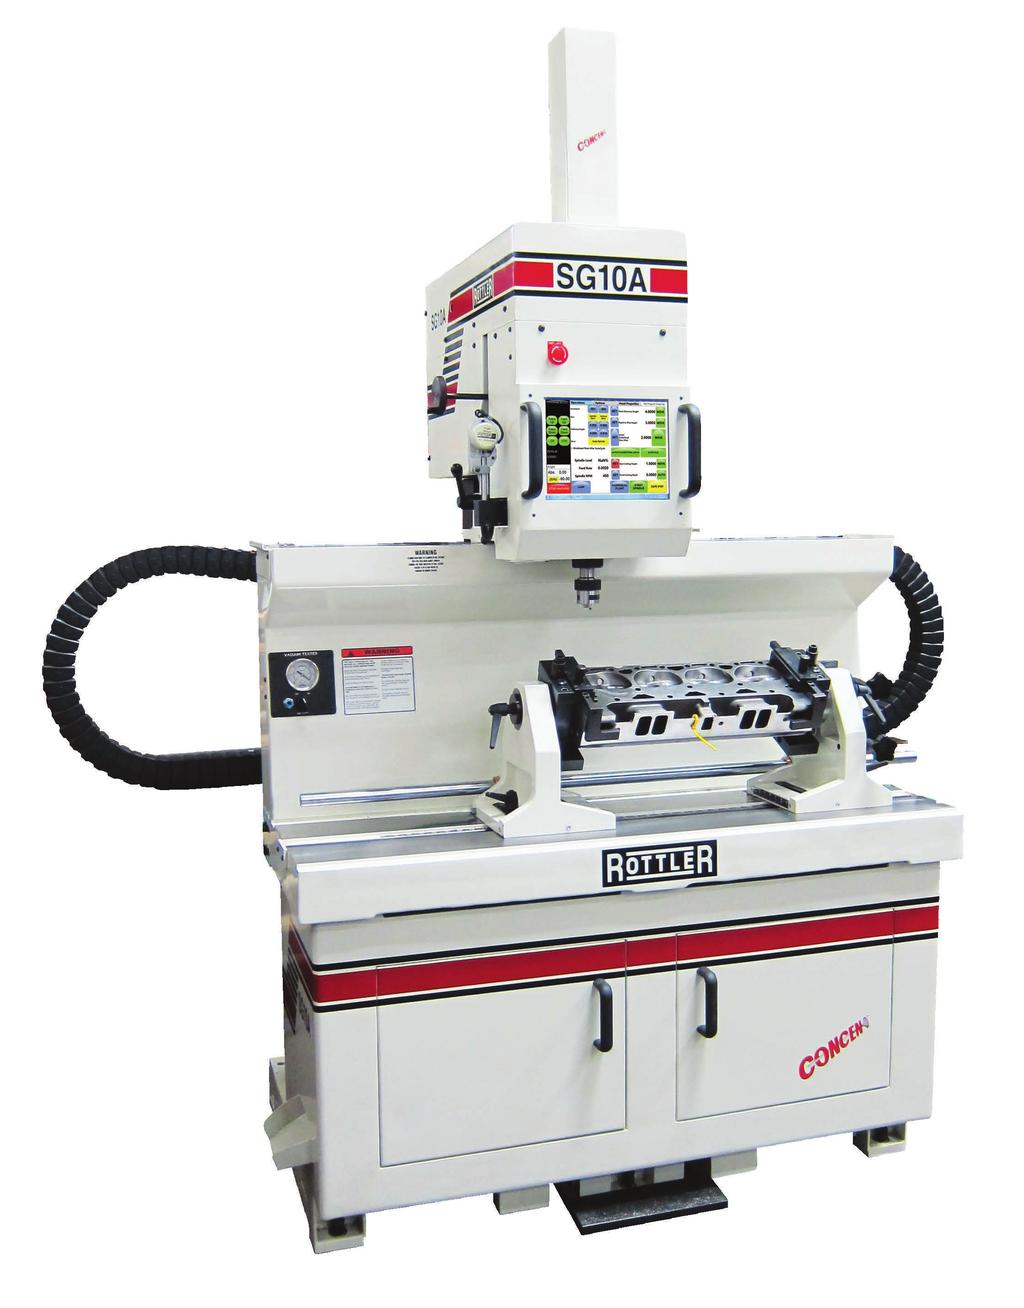 SG10A CYLINDER HEAD SEAT & GUIDE MACHINE Light Weight Work Head The SG10A has a light weight work head for fast and accurate centering for the minimum concentricity.